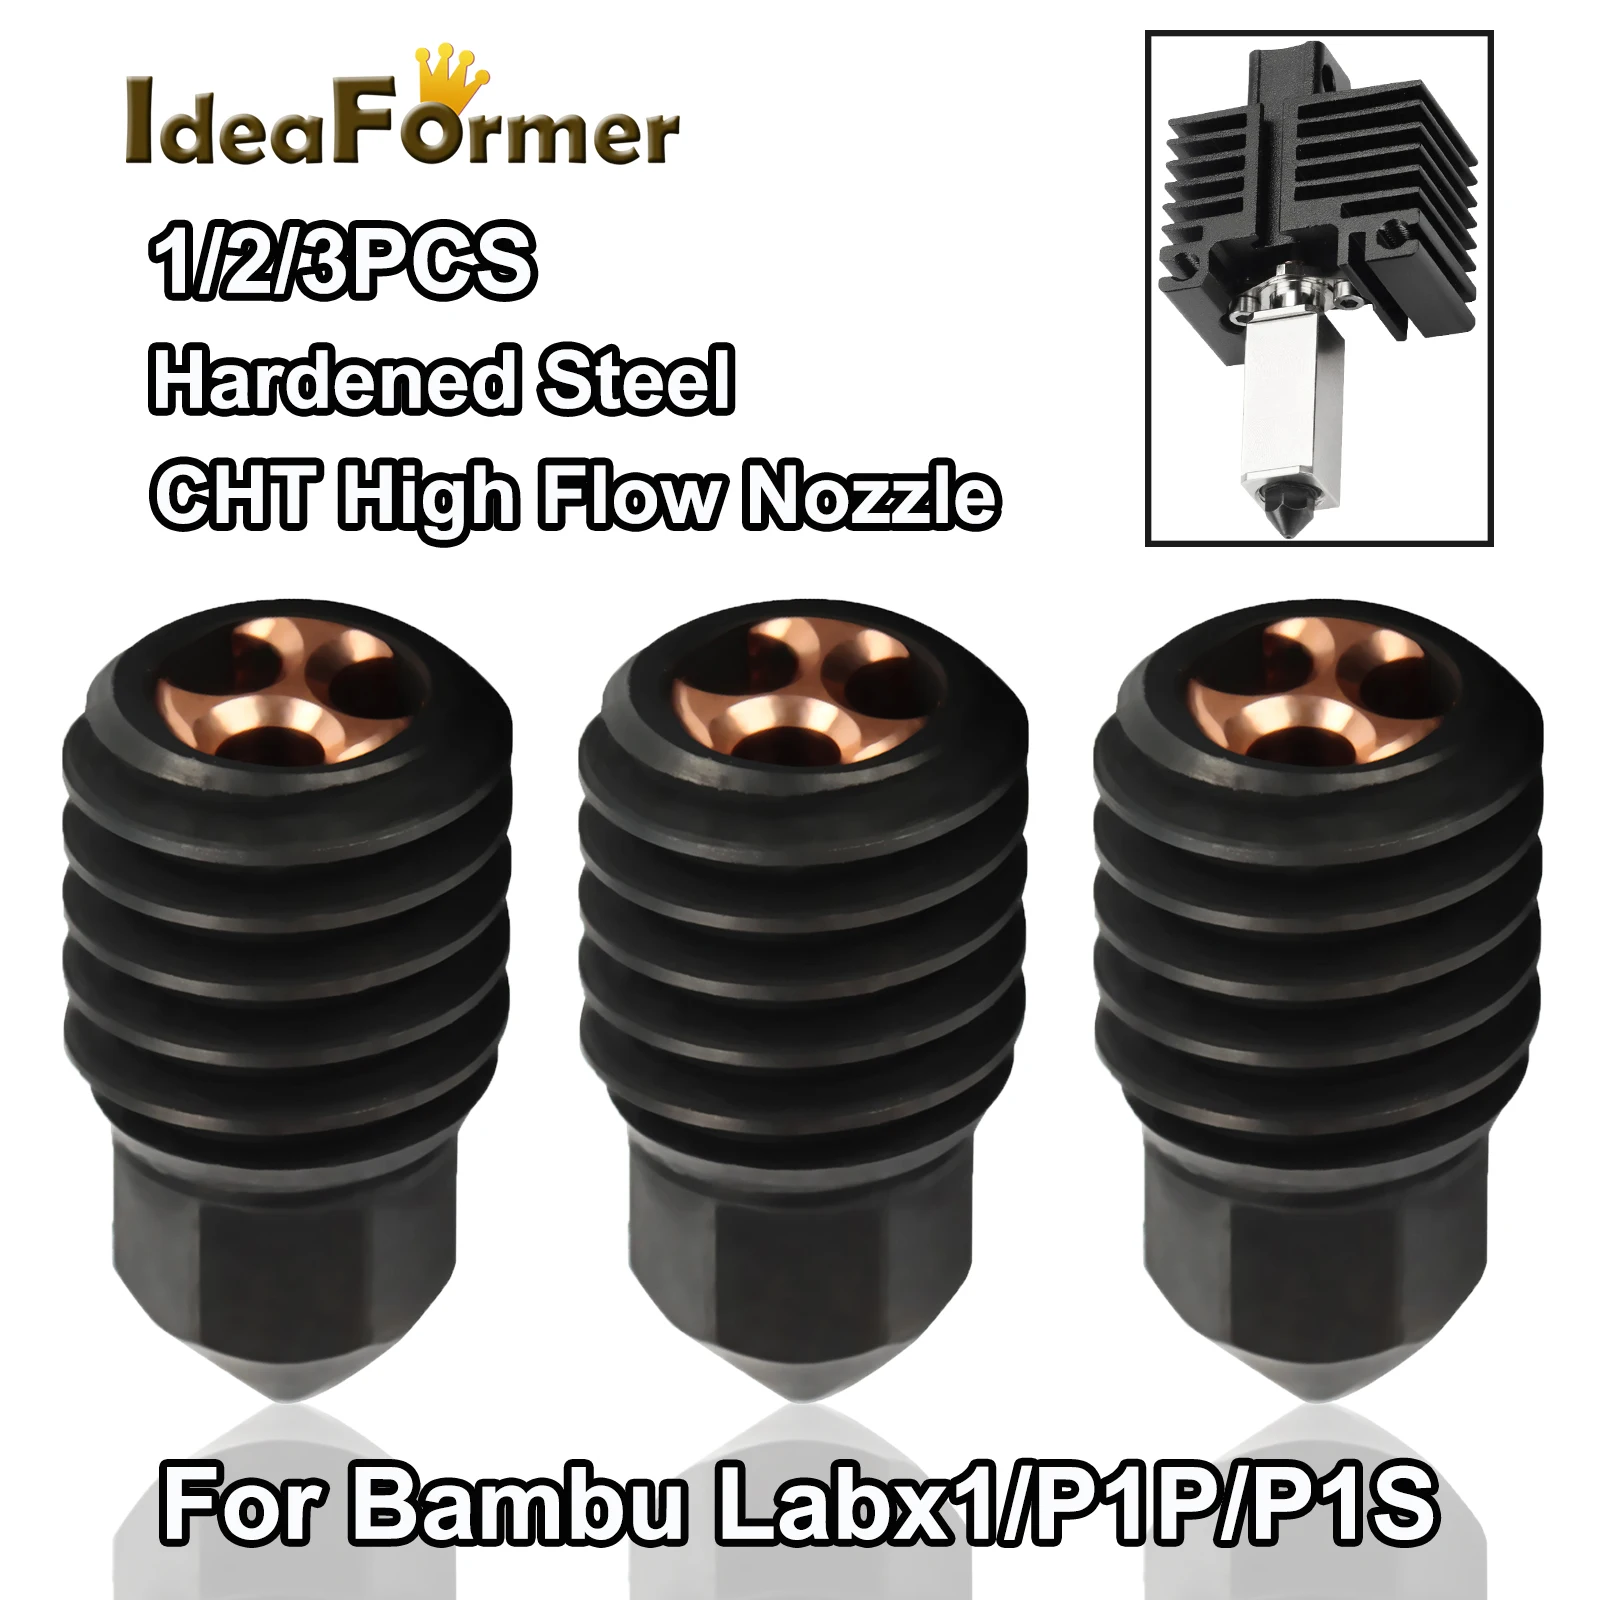 

1/2/3pcs For Bambulab CHT Nozzle Hardened Steel Clone High Flow Nozzle For Bambu Lab x1c p1p p1s Upgraded Hotend 3D Printer